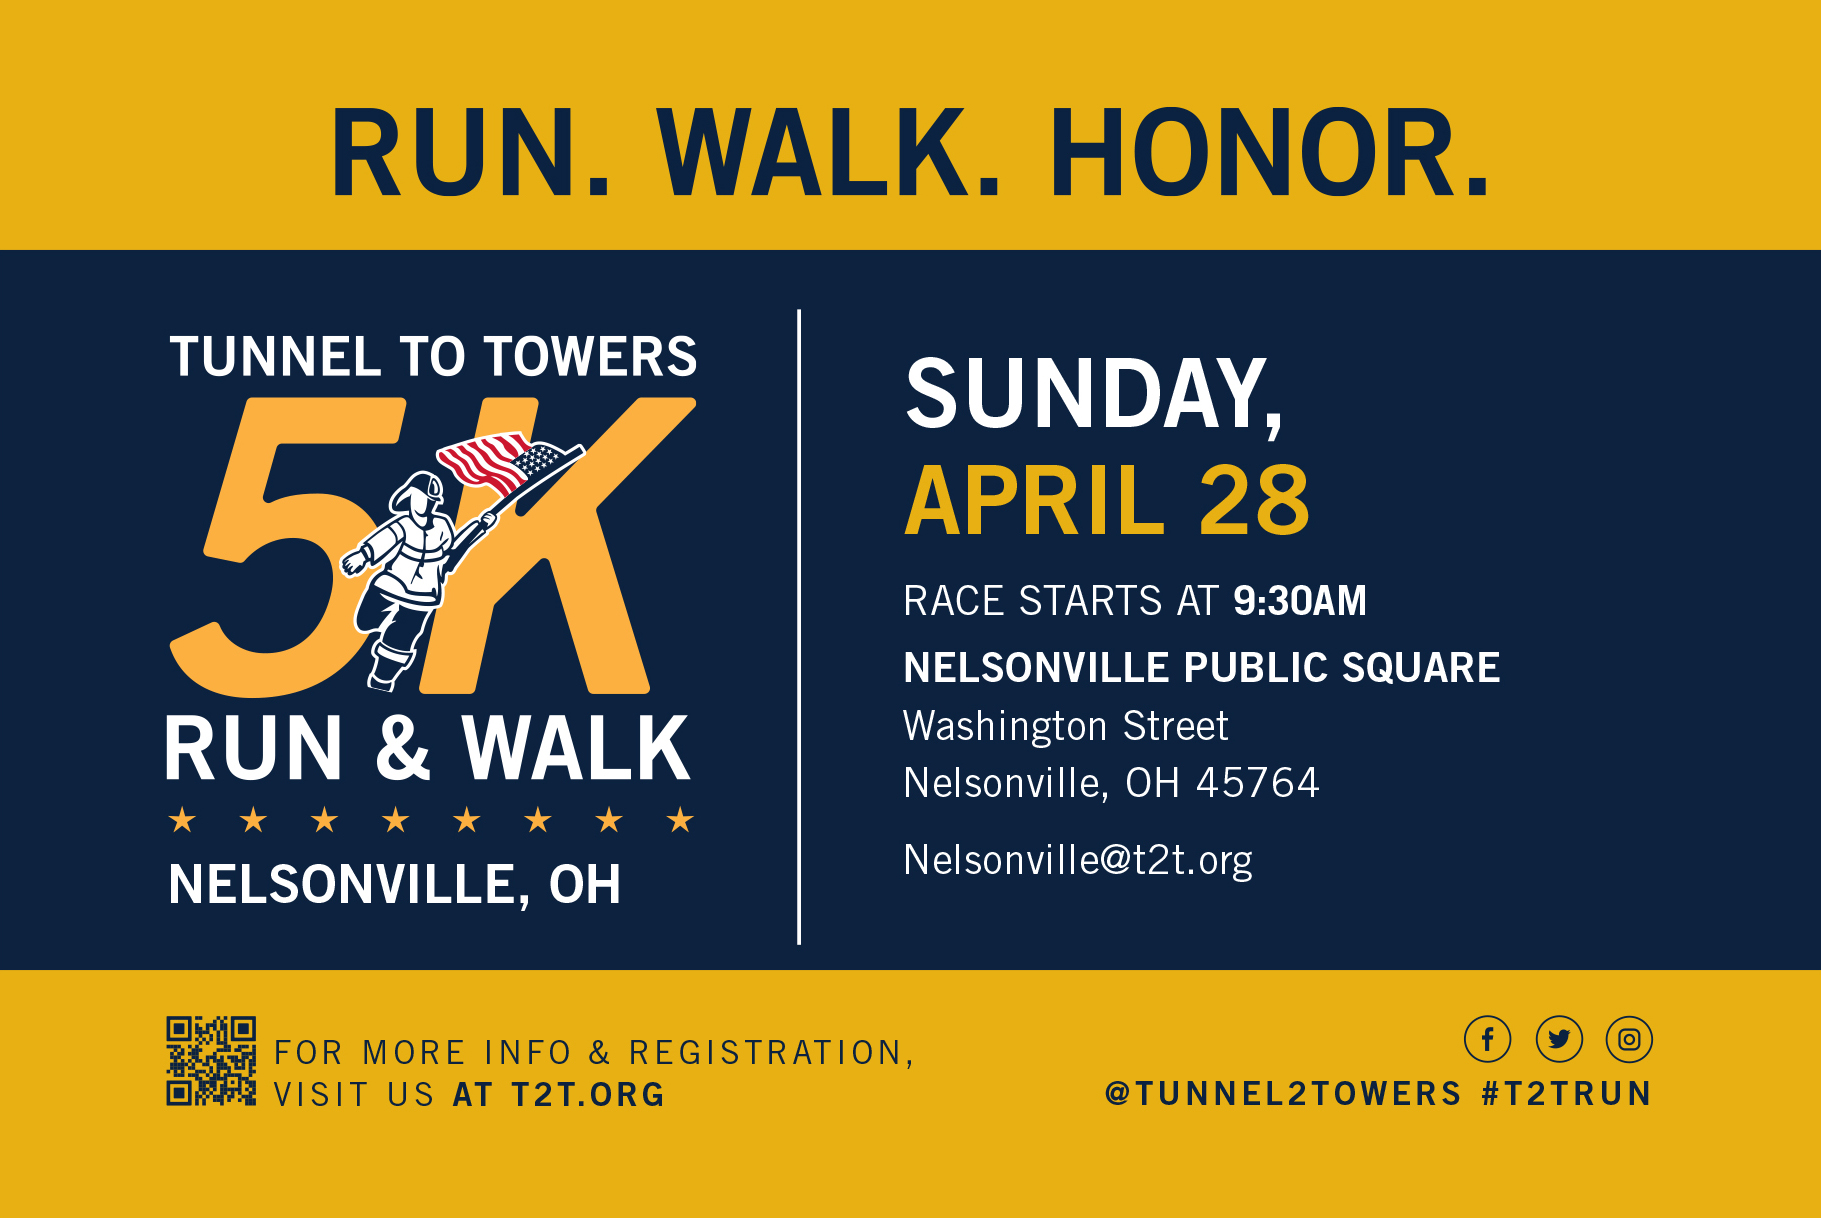 A flyer for the Tunnels to Towers 5K taking place in Nelsonville.